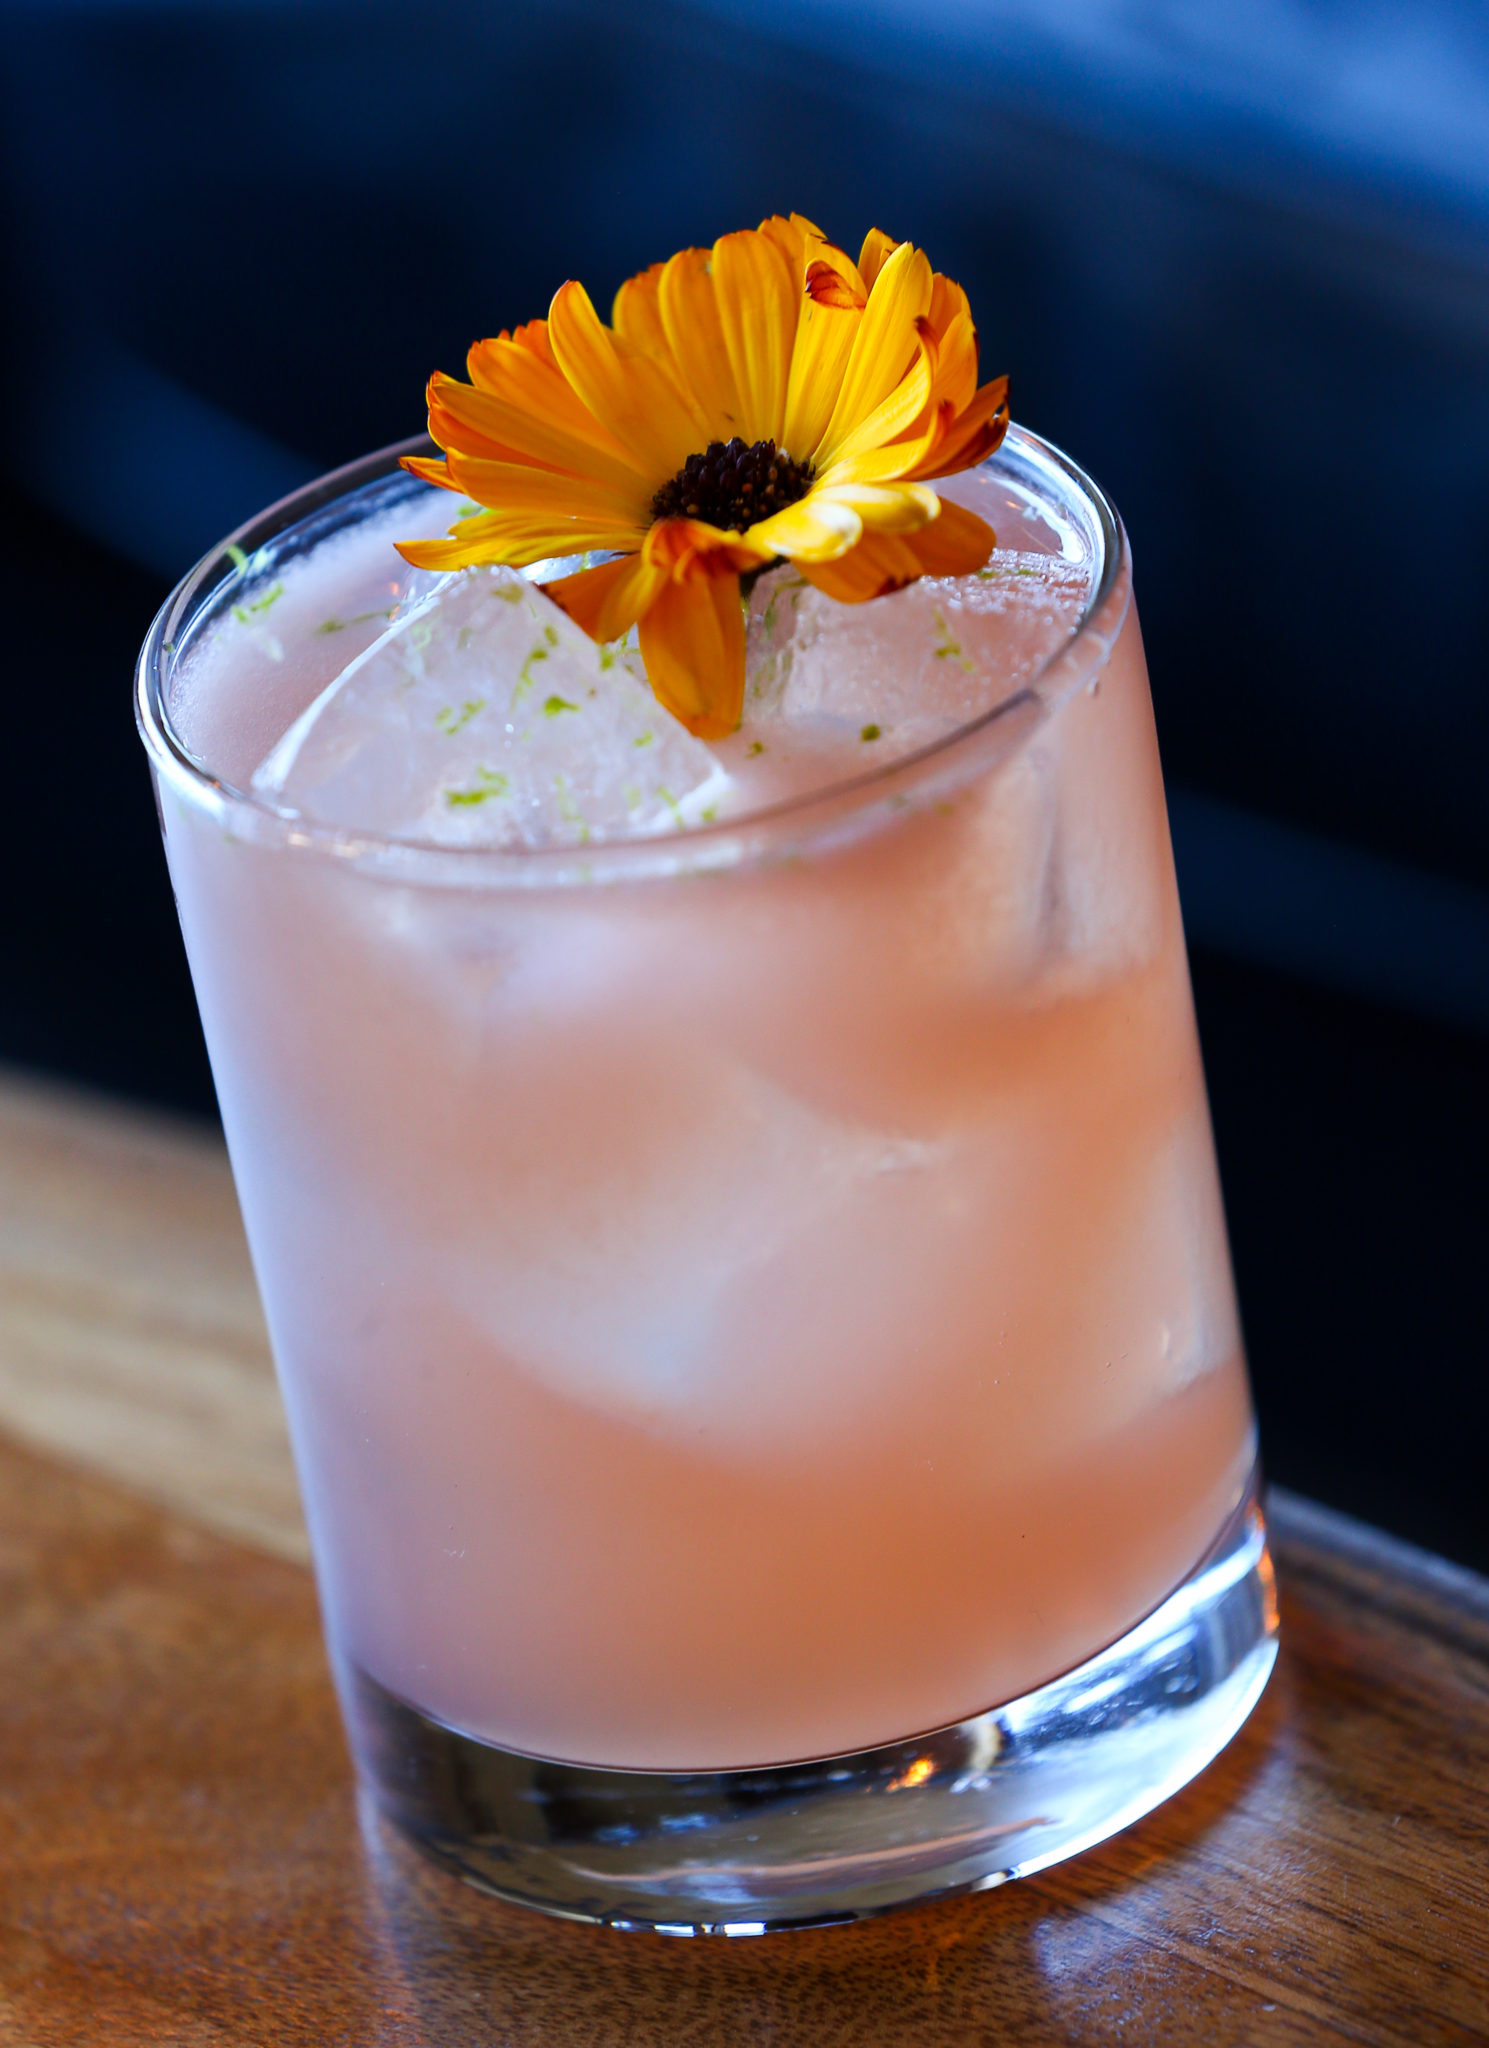 The Oakland cocktail, at Whisper Sisters, consists of tequila, mezcal, cinnamon, port, grapefruit, and banana. (Christopher Chung/ The Press Democrat)